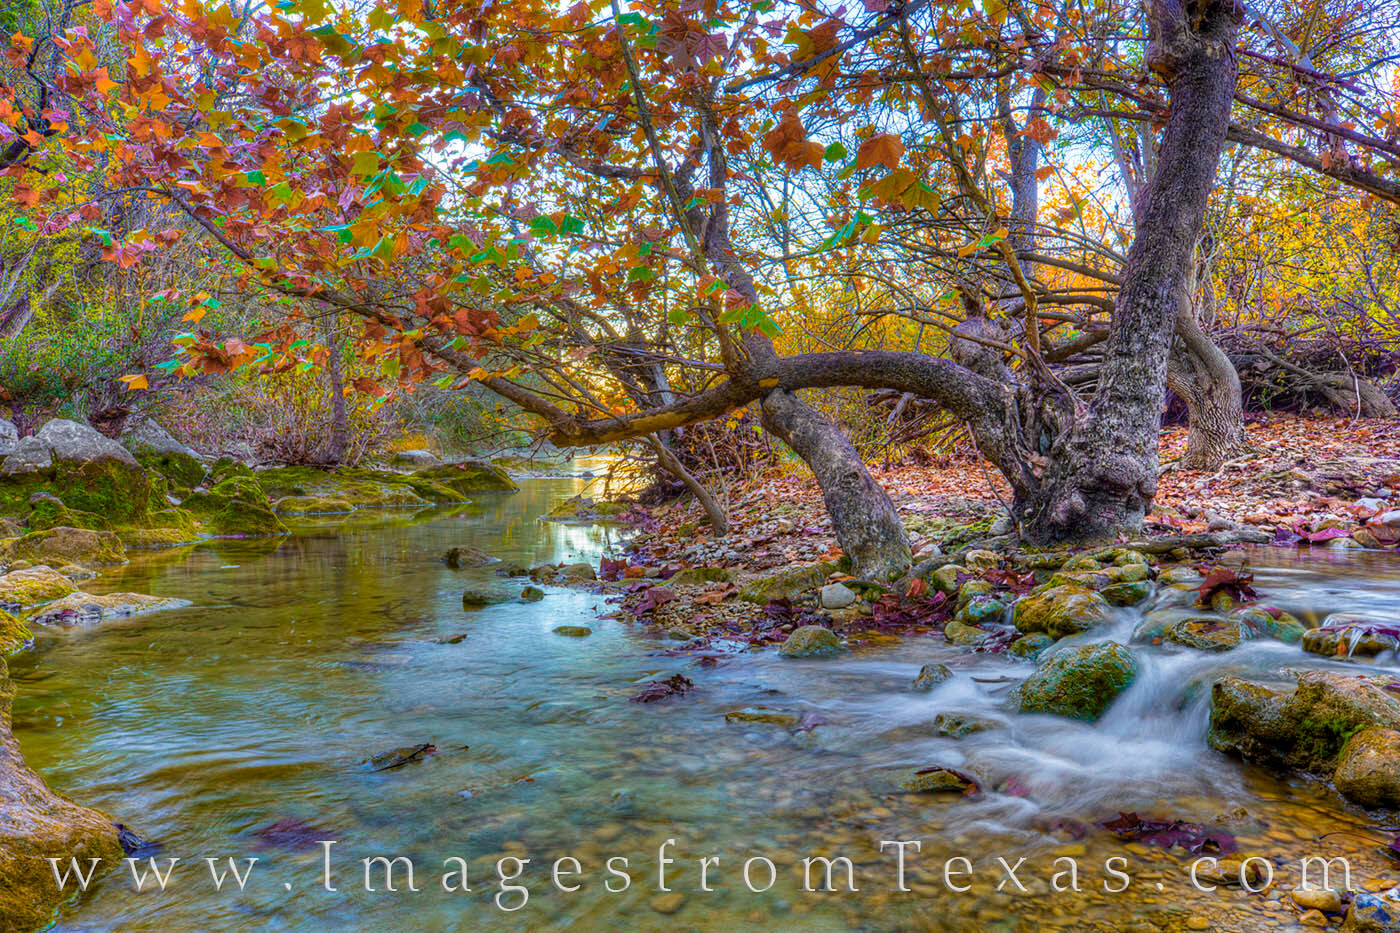 Little scenes like this are a joy to discover. This oak tree draped itself across the shallow and cold water of Barton Creek...